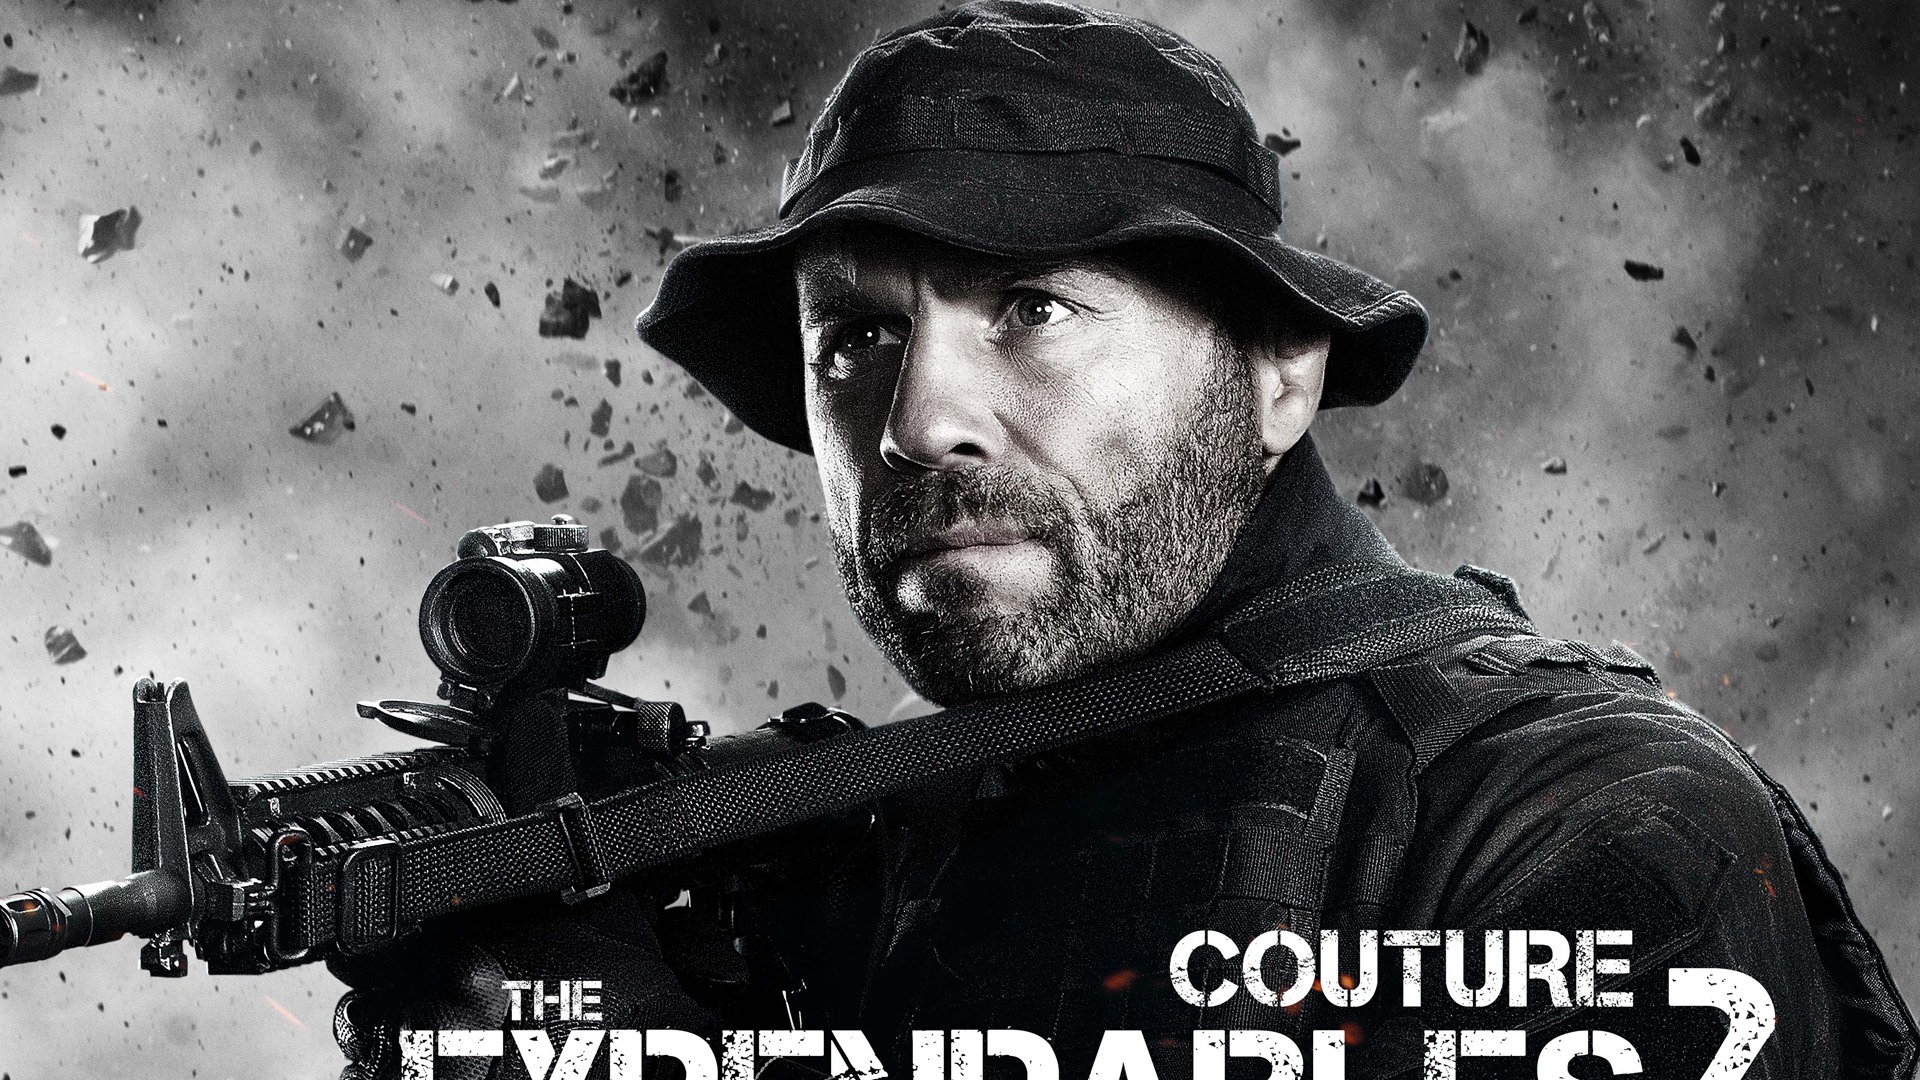 The Expendables 敢死队 高清壁纸10 - 1920x1200 壁纸下载 - The Expendables 敢死队 高清壁纸 ...